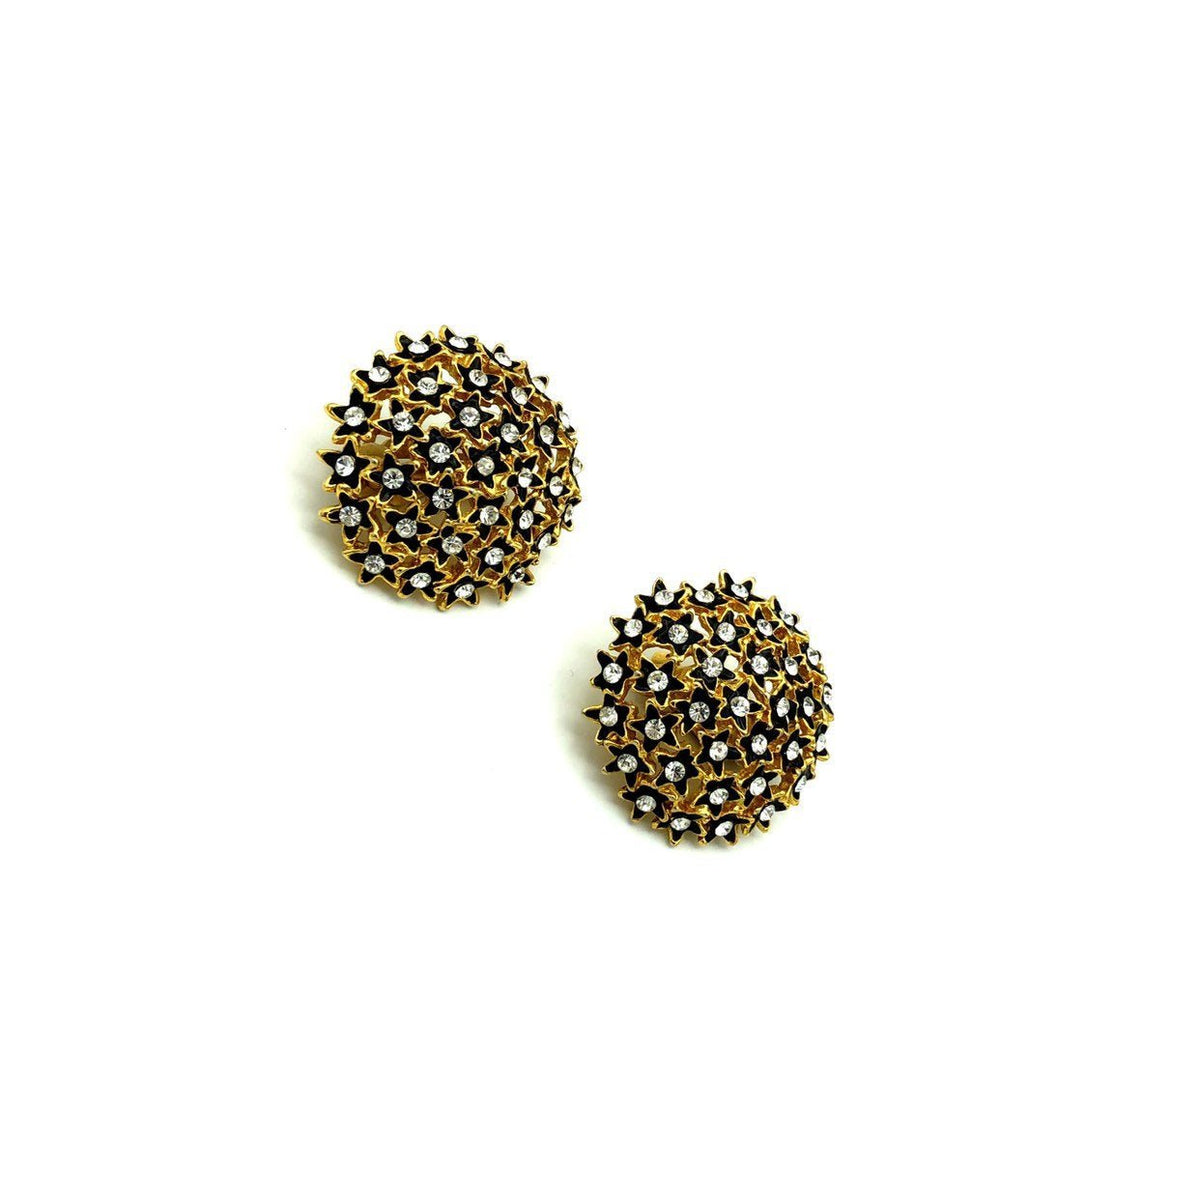 Large Gold Cluster Black Flower Rhinestone Clip-On Earrings - 24 Wishes Vintage Jewelry